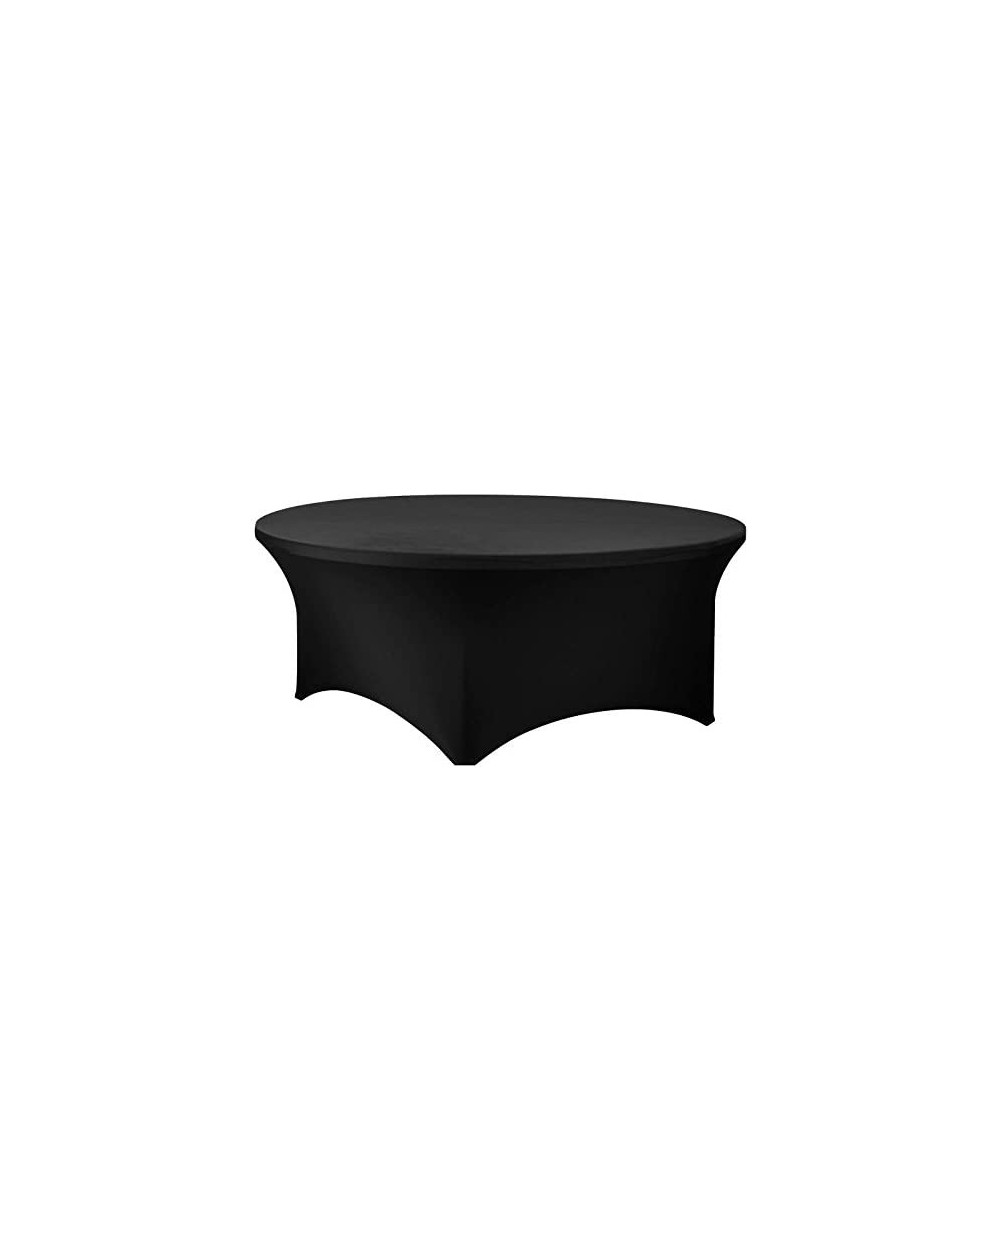 Tablecovers Black 60 Inch 5 Foot Round Stretch Spandex Tablecover - Black - CC185Q07UEZ $15.78